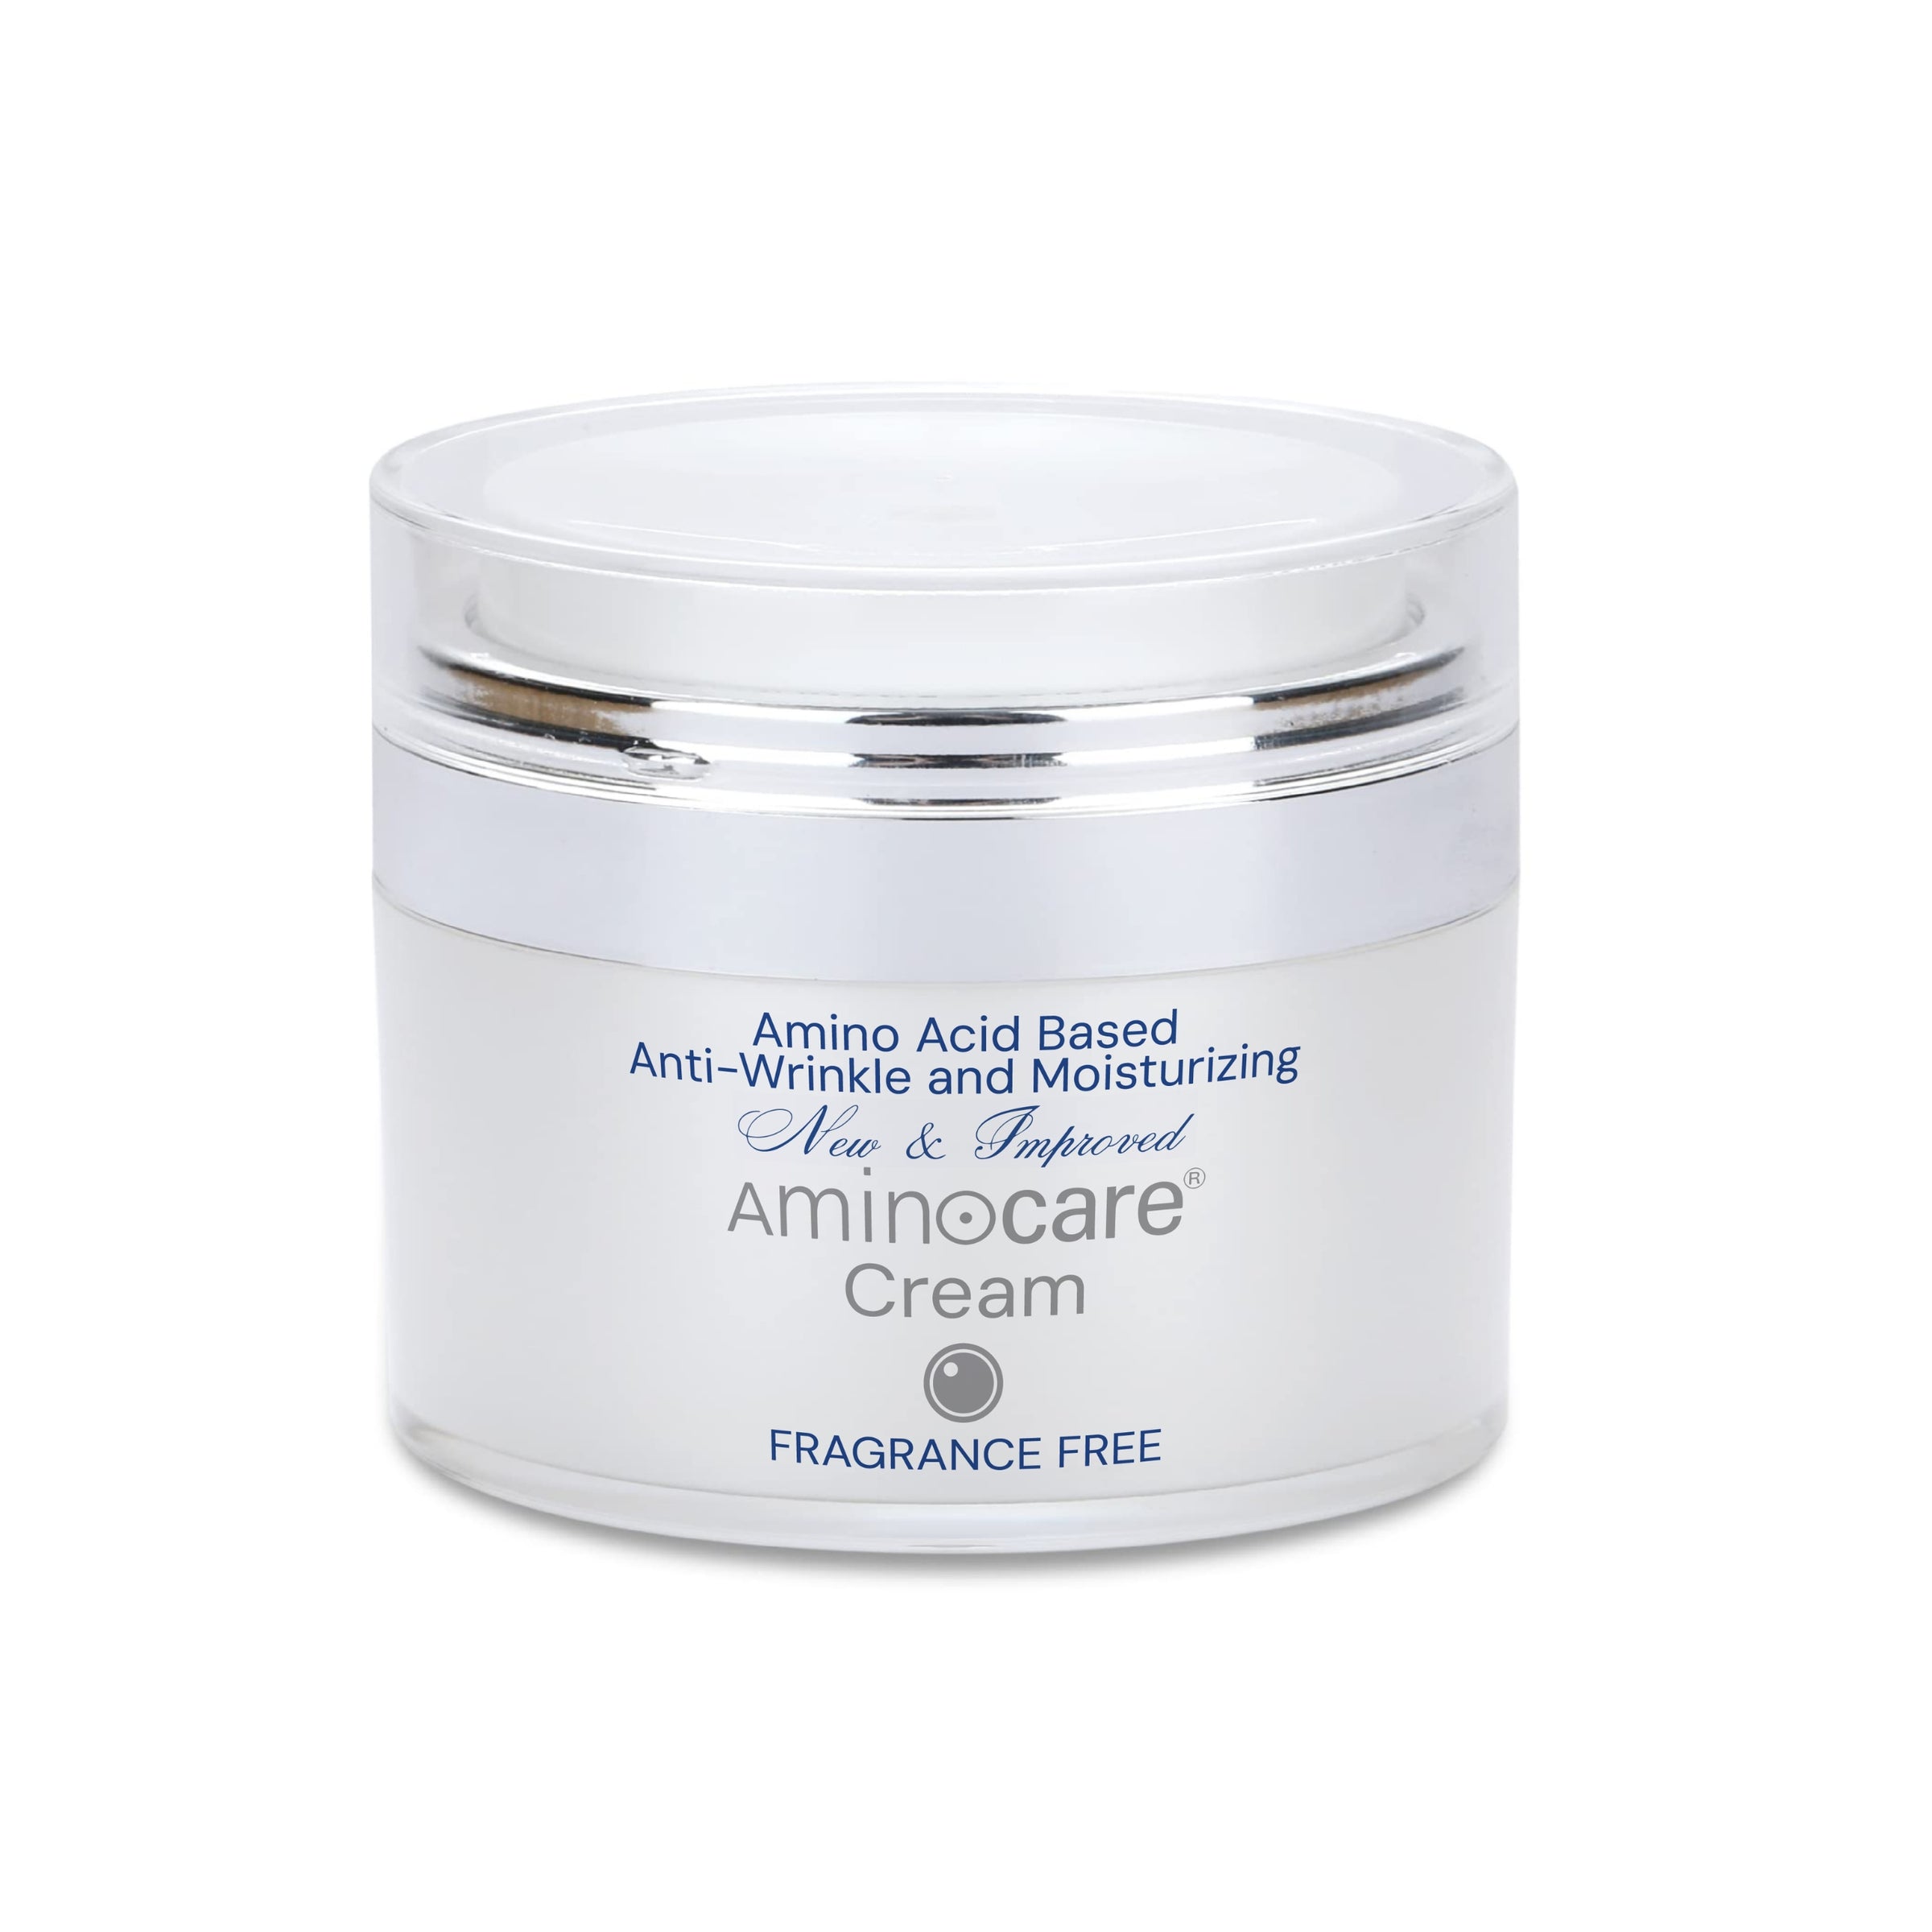 AMINOCARE® NEW AND IMPROVED CREAM FRAGRANCE FREE